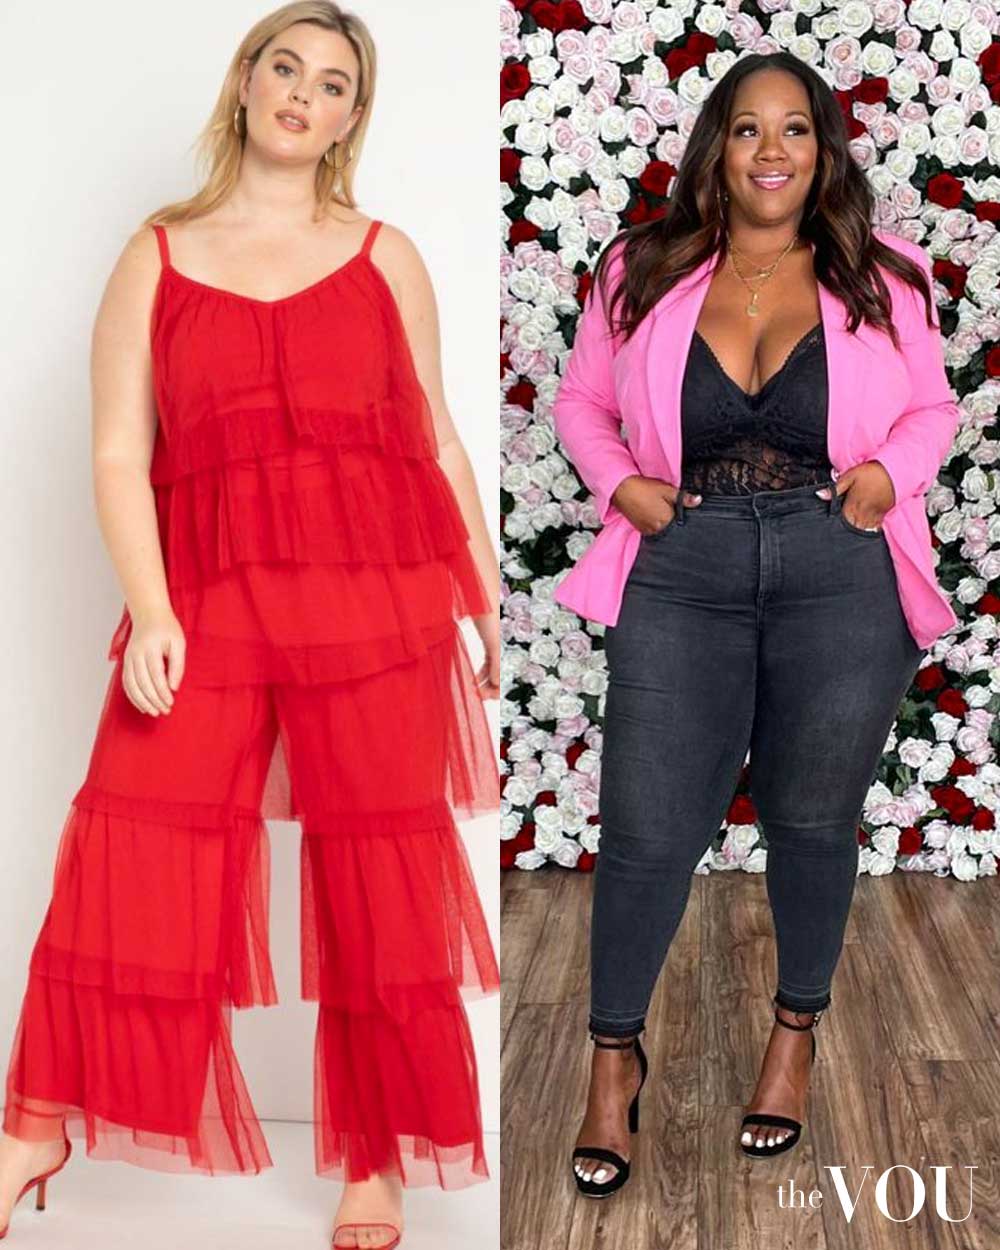 20 Hottest Valentine's Day Outfit Ideas for a Romantic Date Night